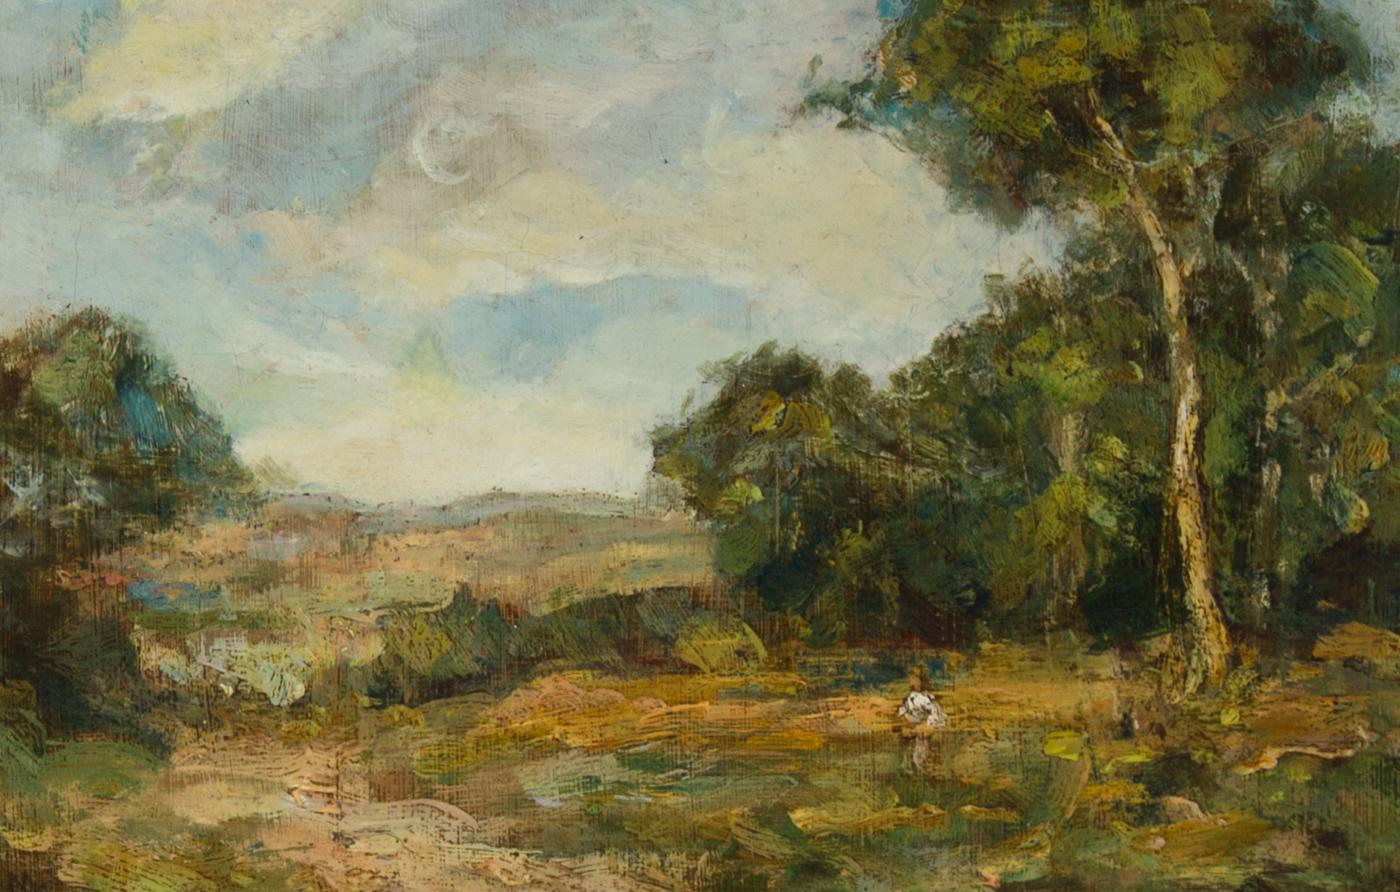 Attrib Robert McGregor (1848-1922) - Early 20th Century Oil, A Summer Landscape - Painting by Robert McGregor R.S.A